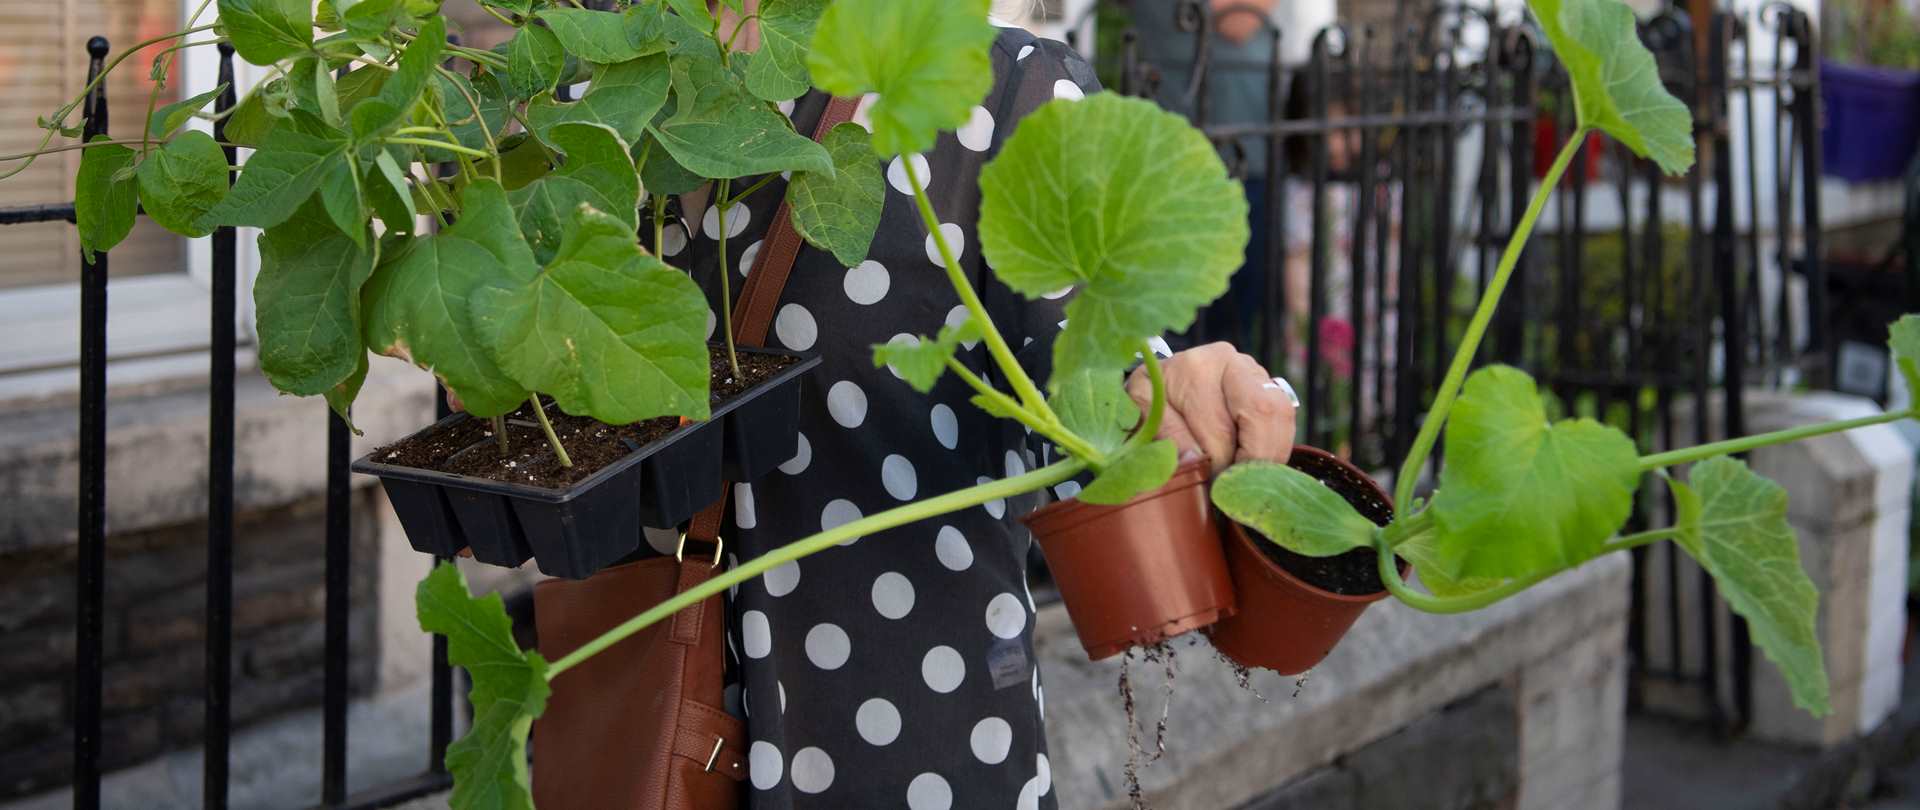 Woman holding plants in pots and smiling